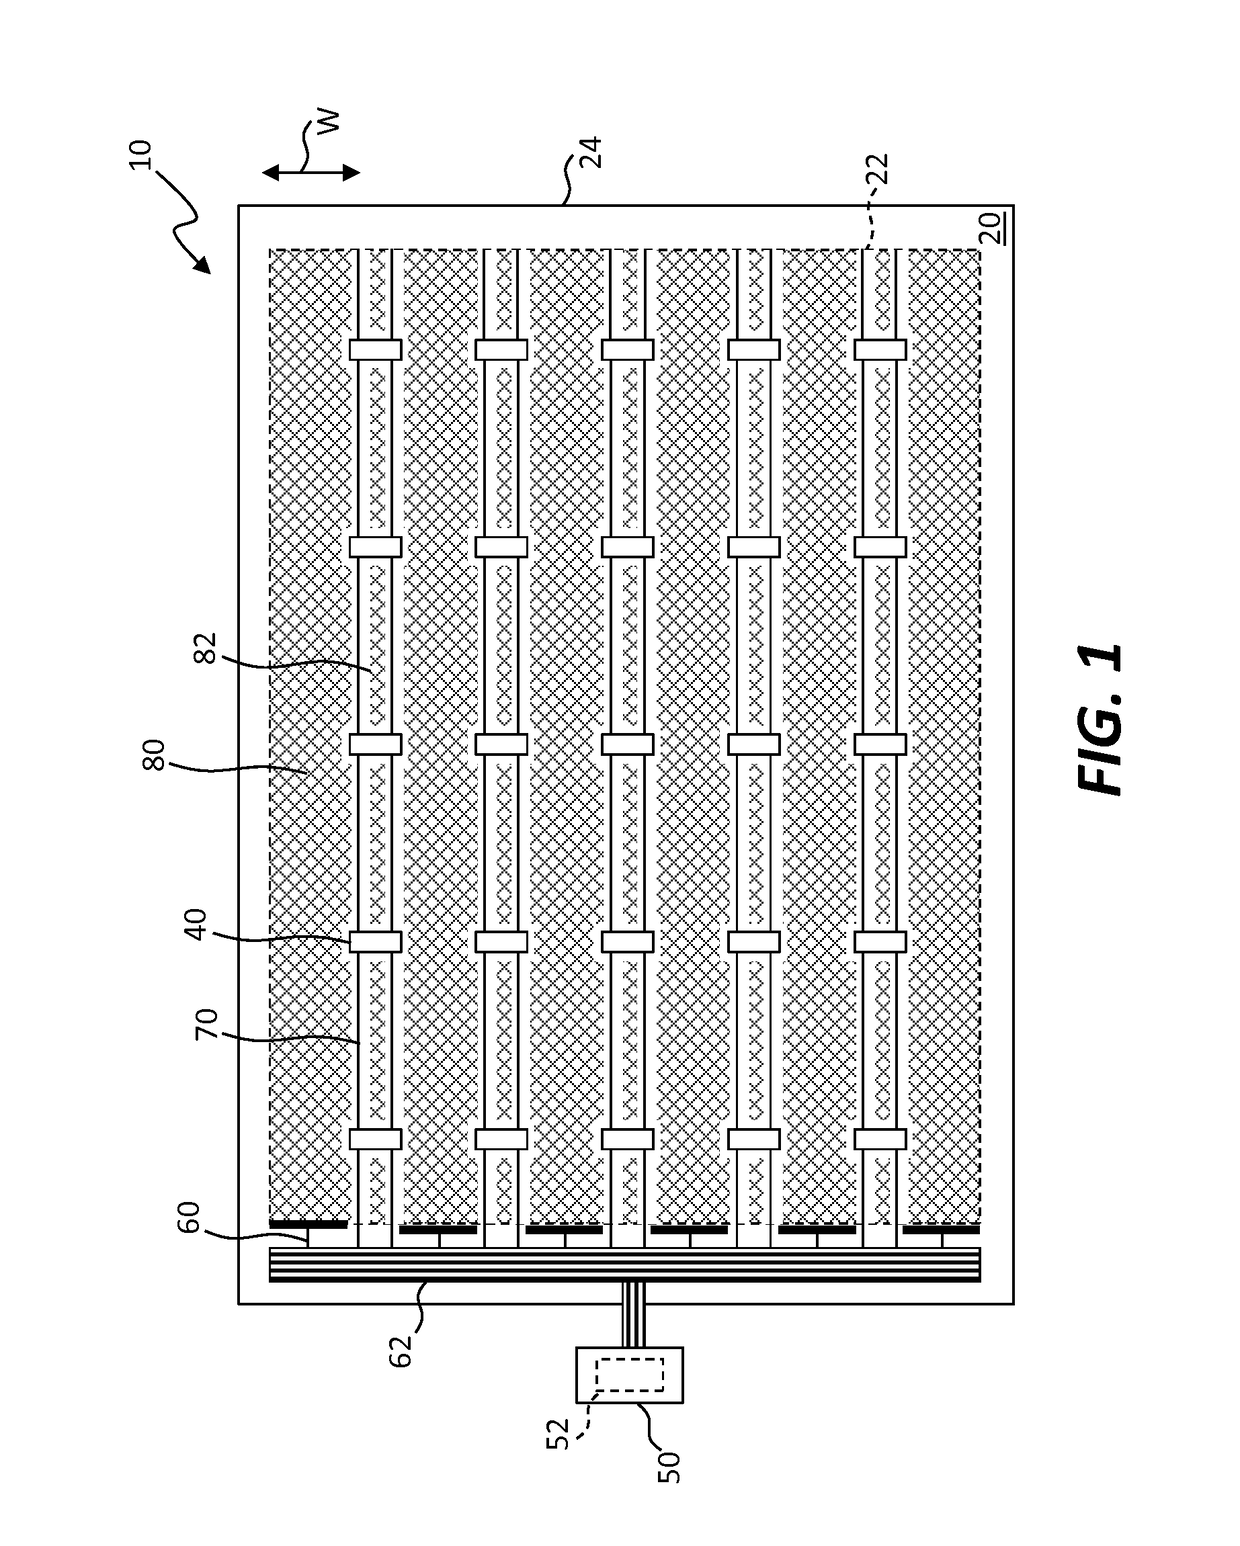 Display with integrated electrodes